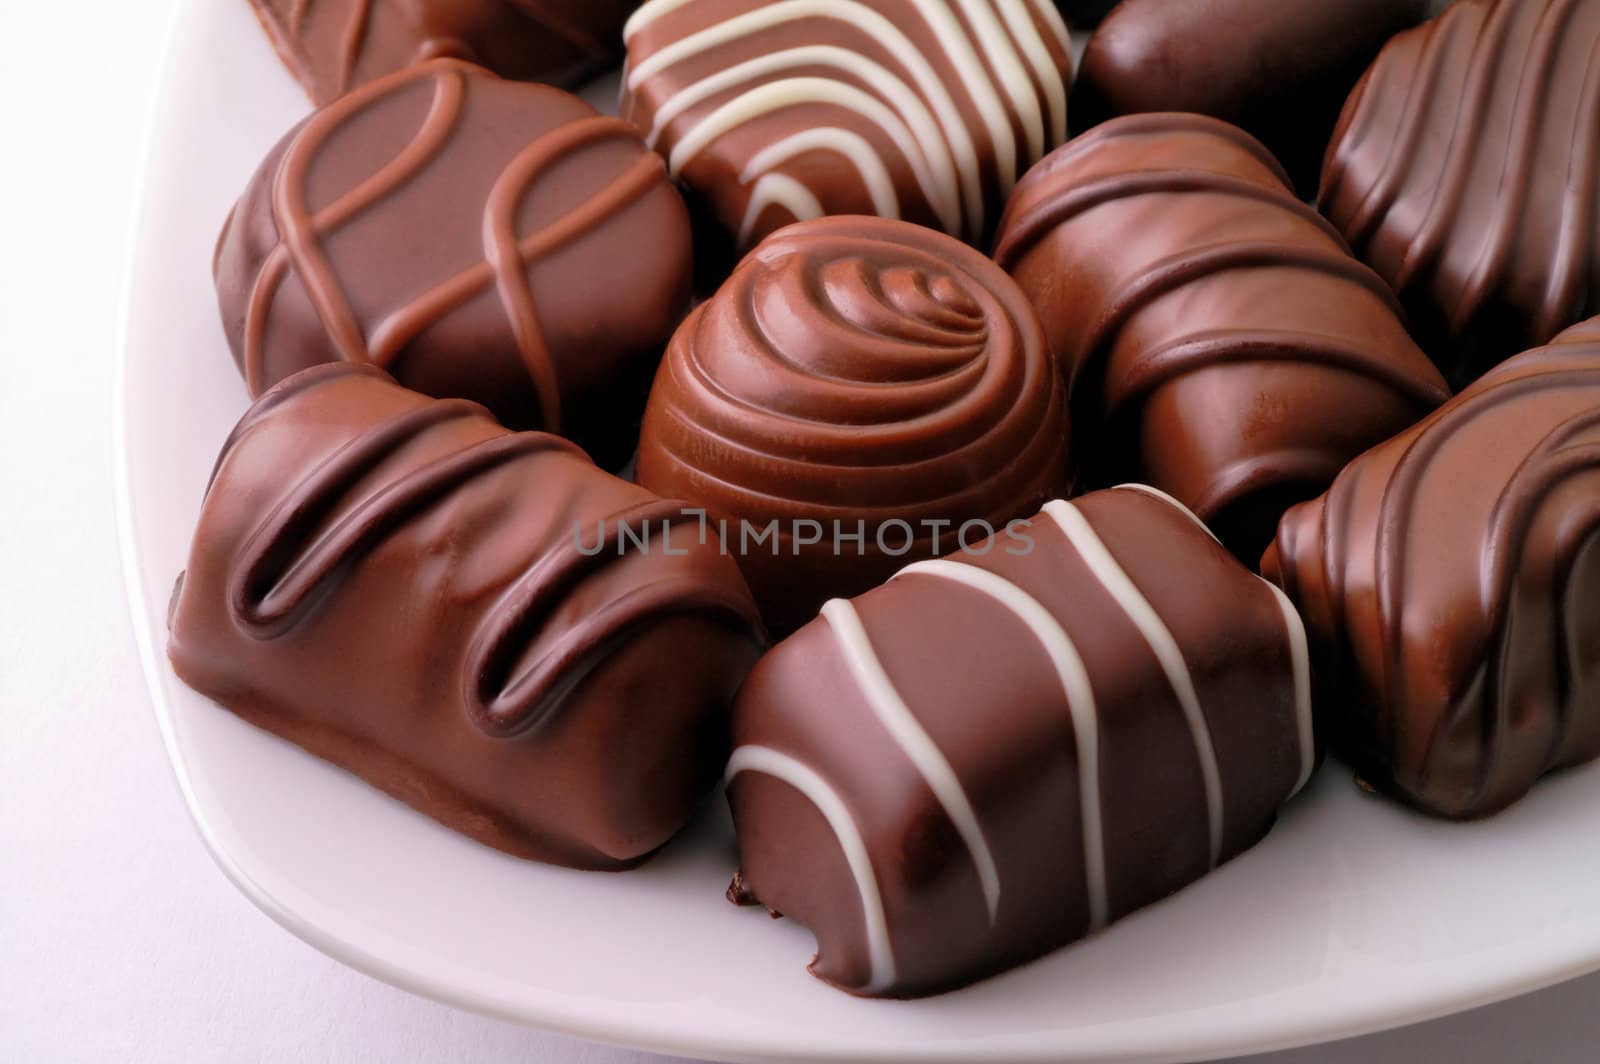 Chocolate candies in a dish